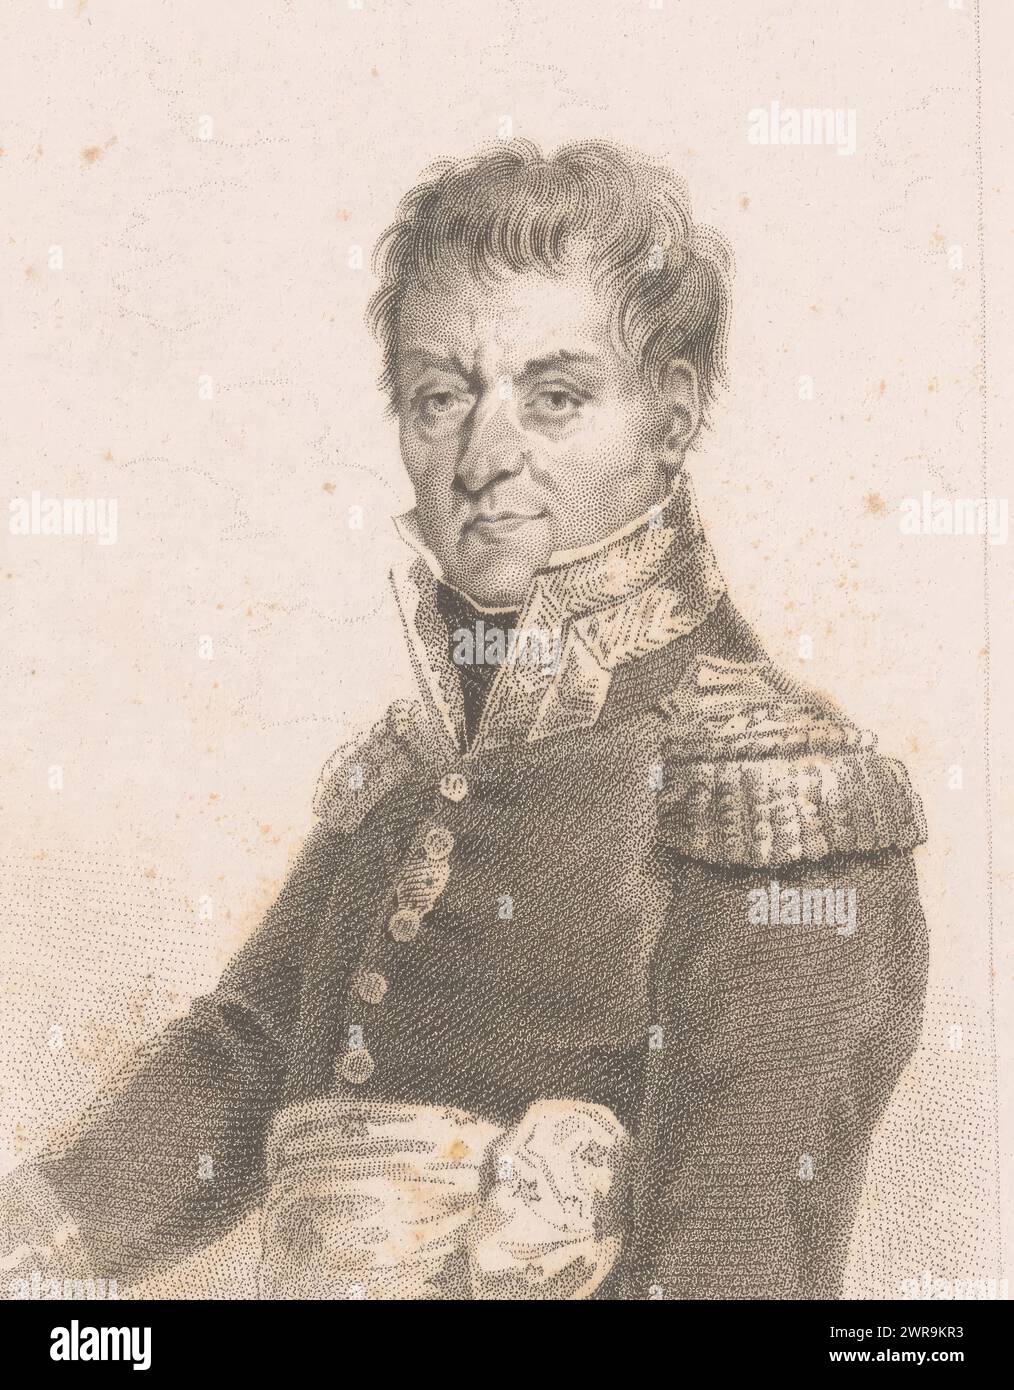 Portrait of Lazare Carnot with Antwerp emergency coin, print maker: Millot, after drawing by: Achille Devéria, François Louis Couché, 1800 - 1895, paper, engraving, height 174 mm × width 104 mm, print Stock Photo